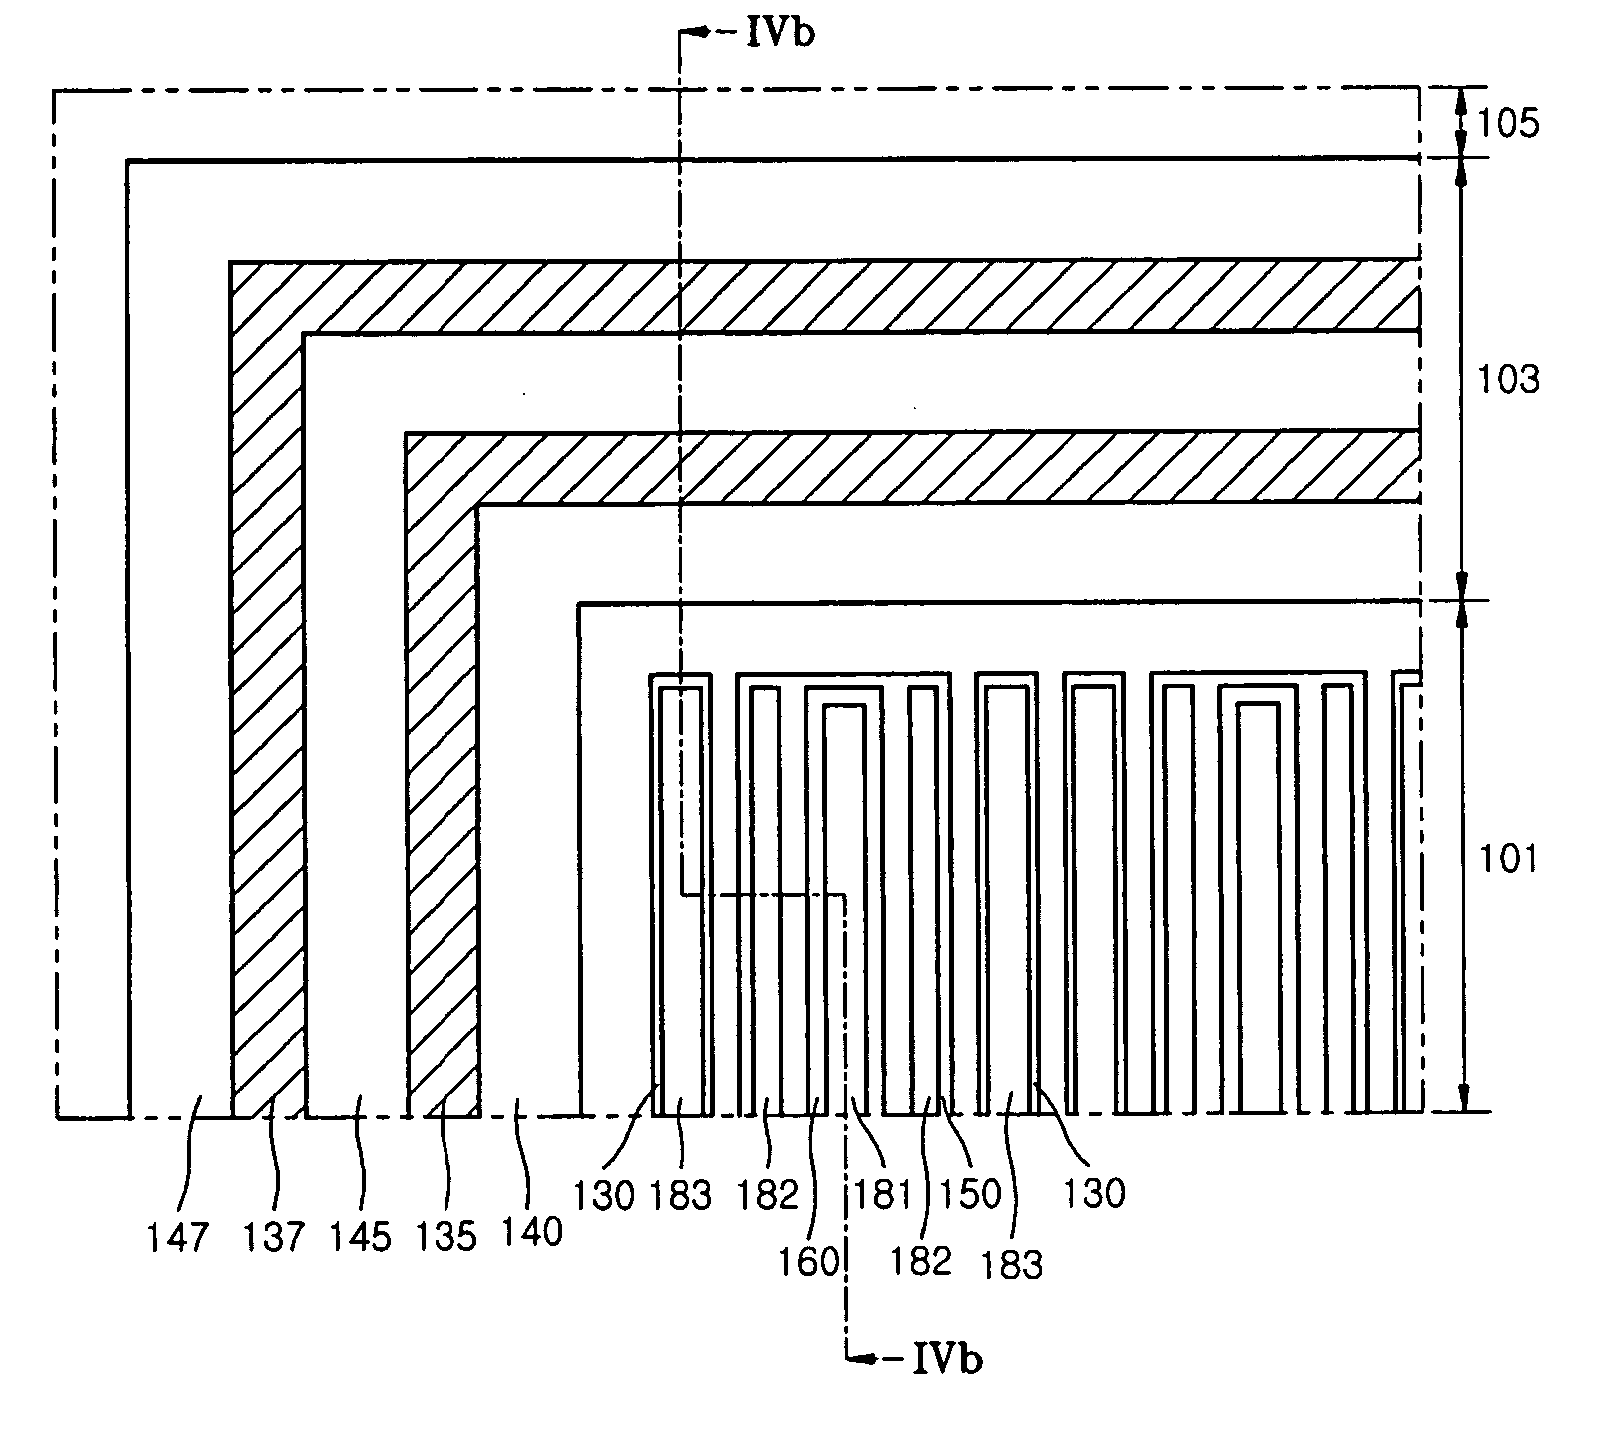 High voltage integration circuit with freewheeling diode embedded in transistor